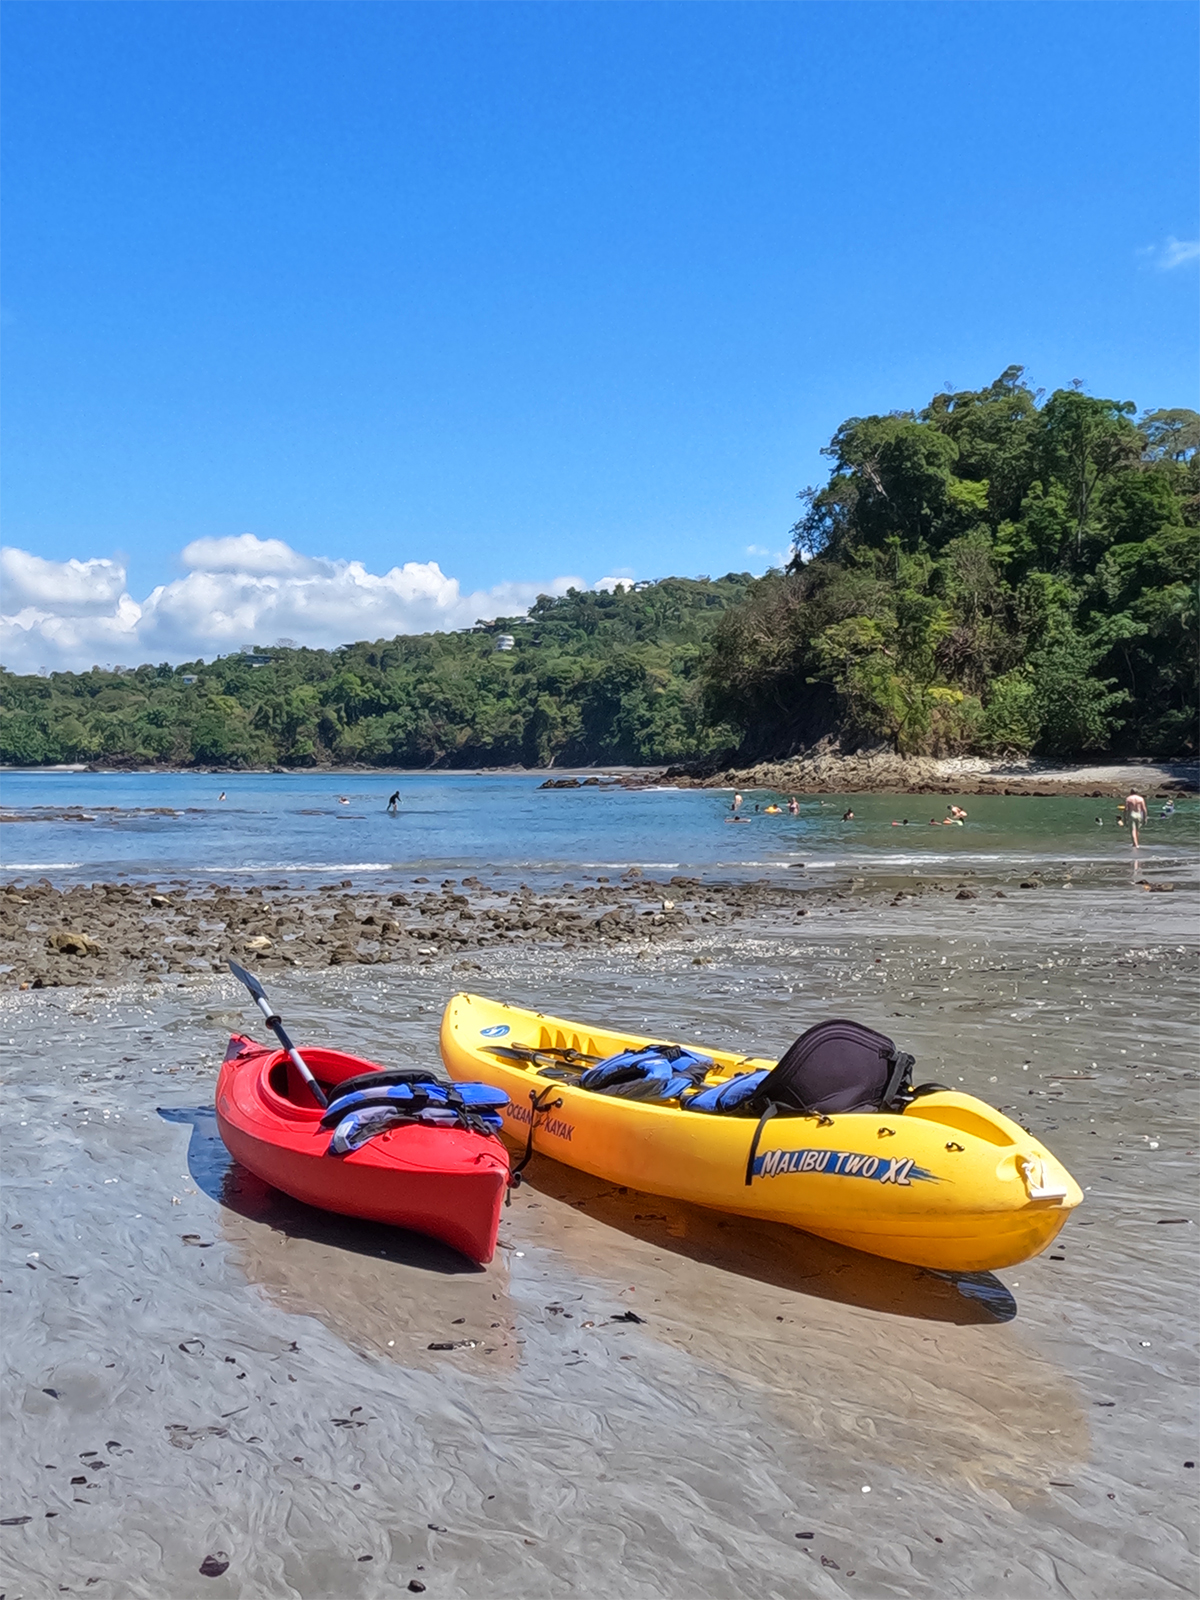 red and yellow kayaks on beaches of Manuel Antonio with rocky shoreline blue skies and trees